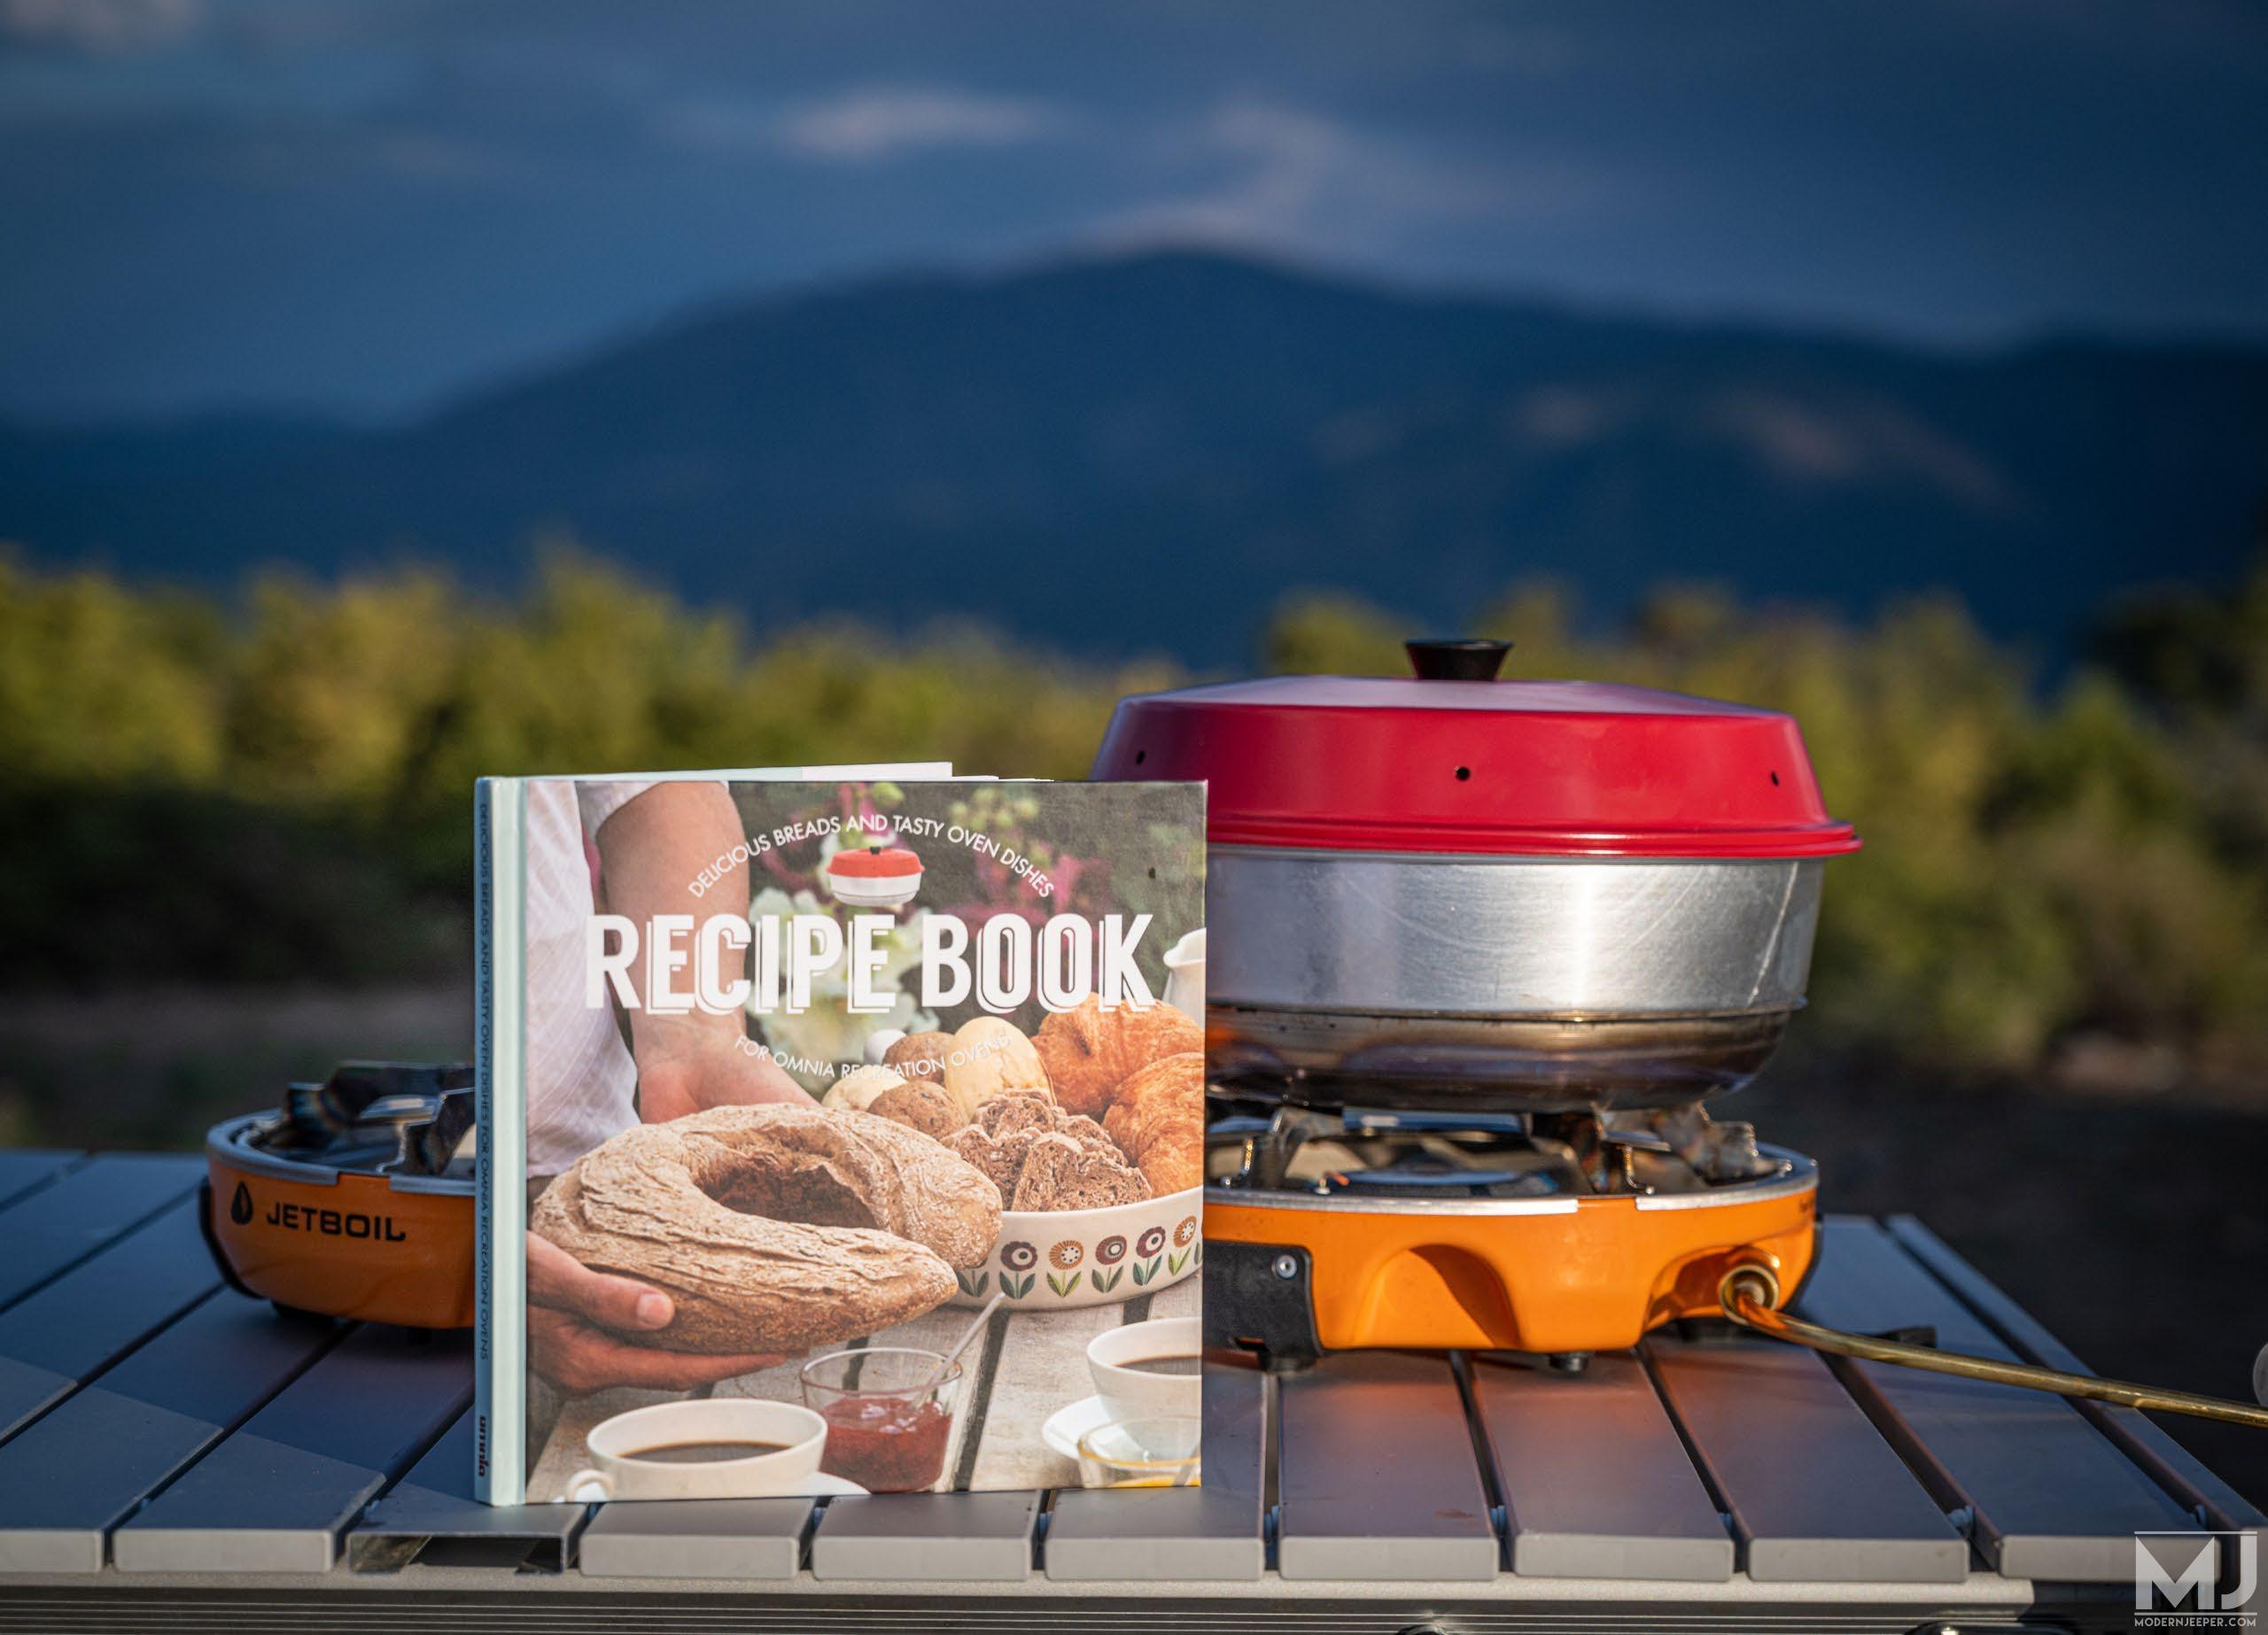 The Omnia Oven: Bake Anything While Camping - Grass and Roots Family